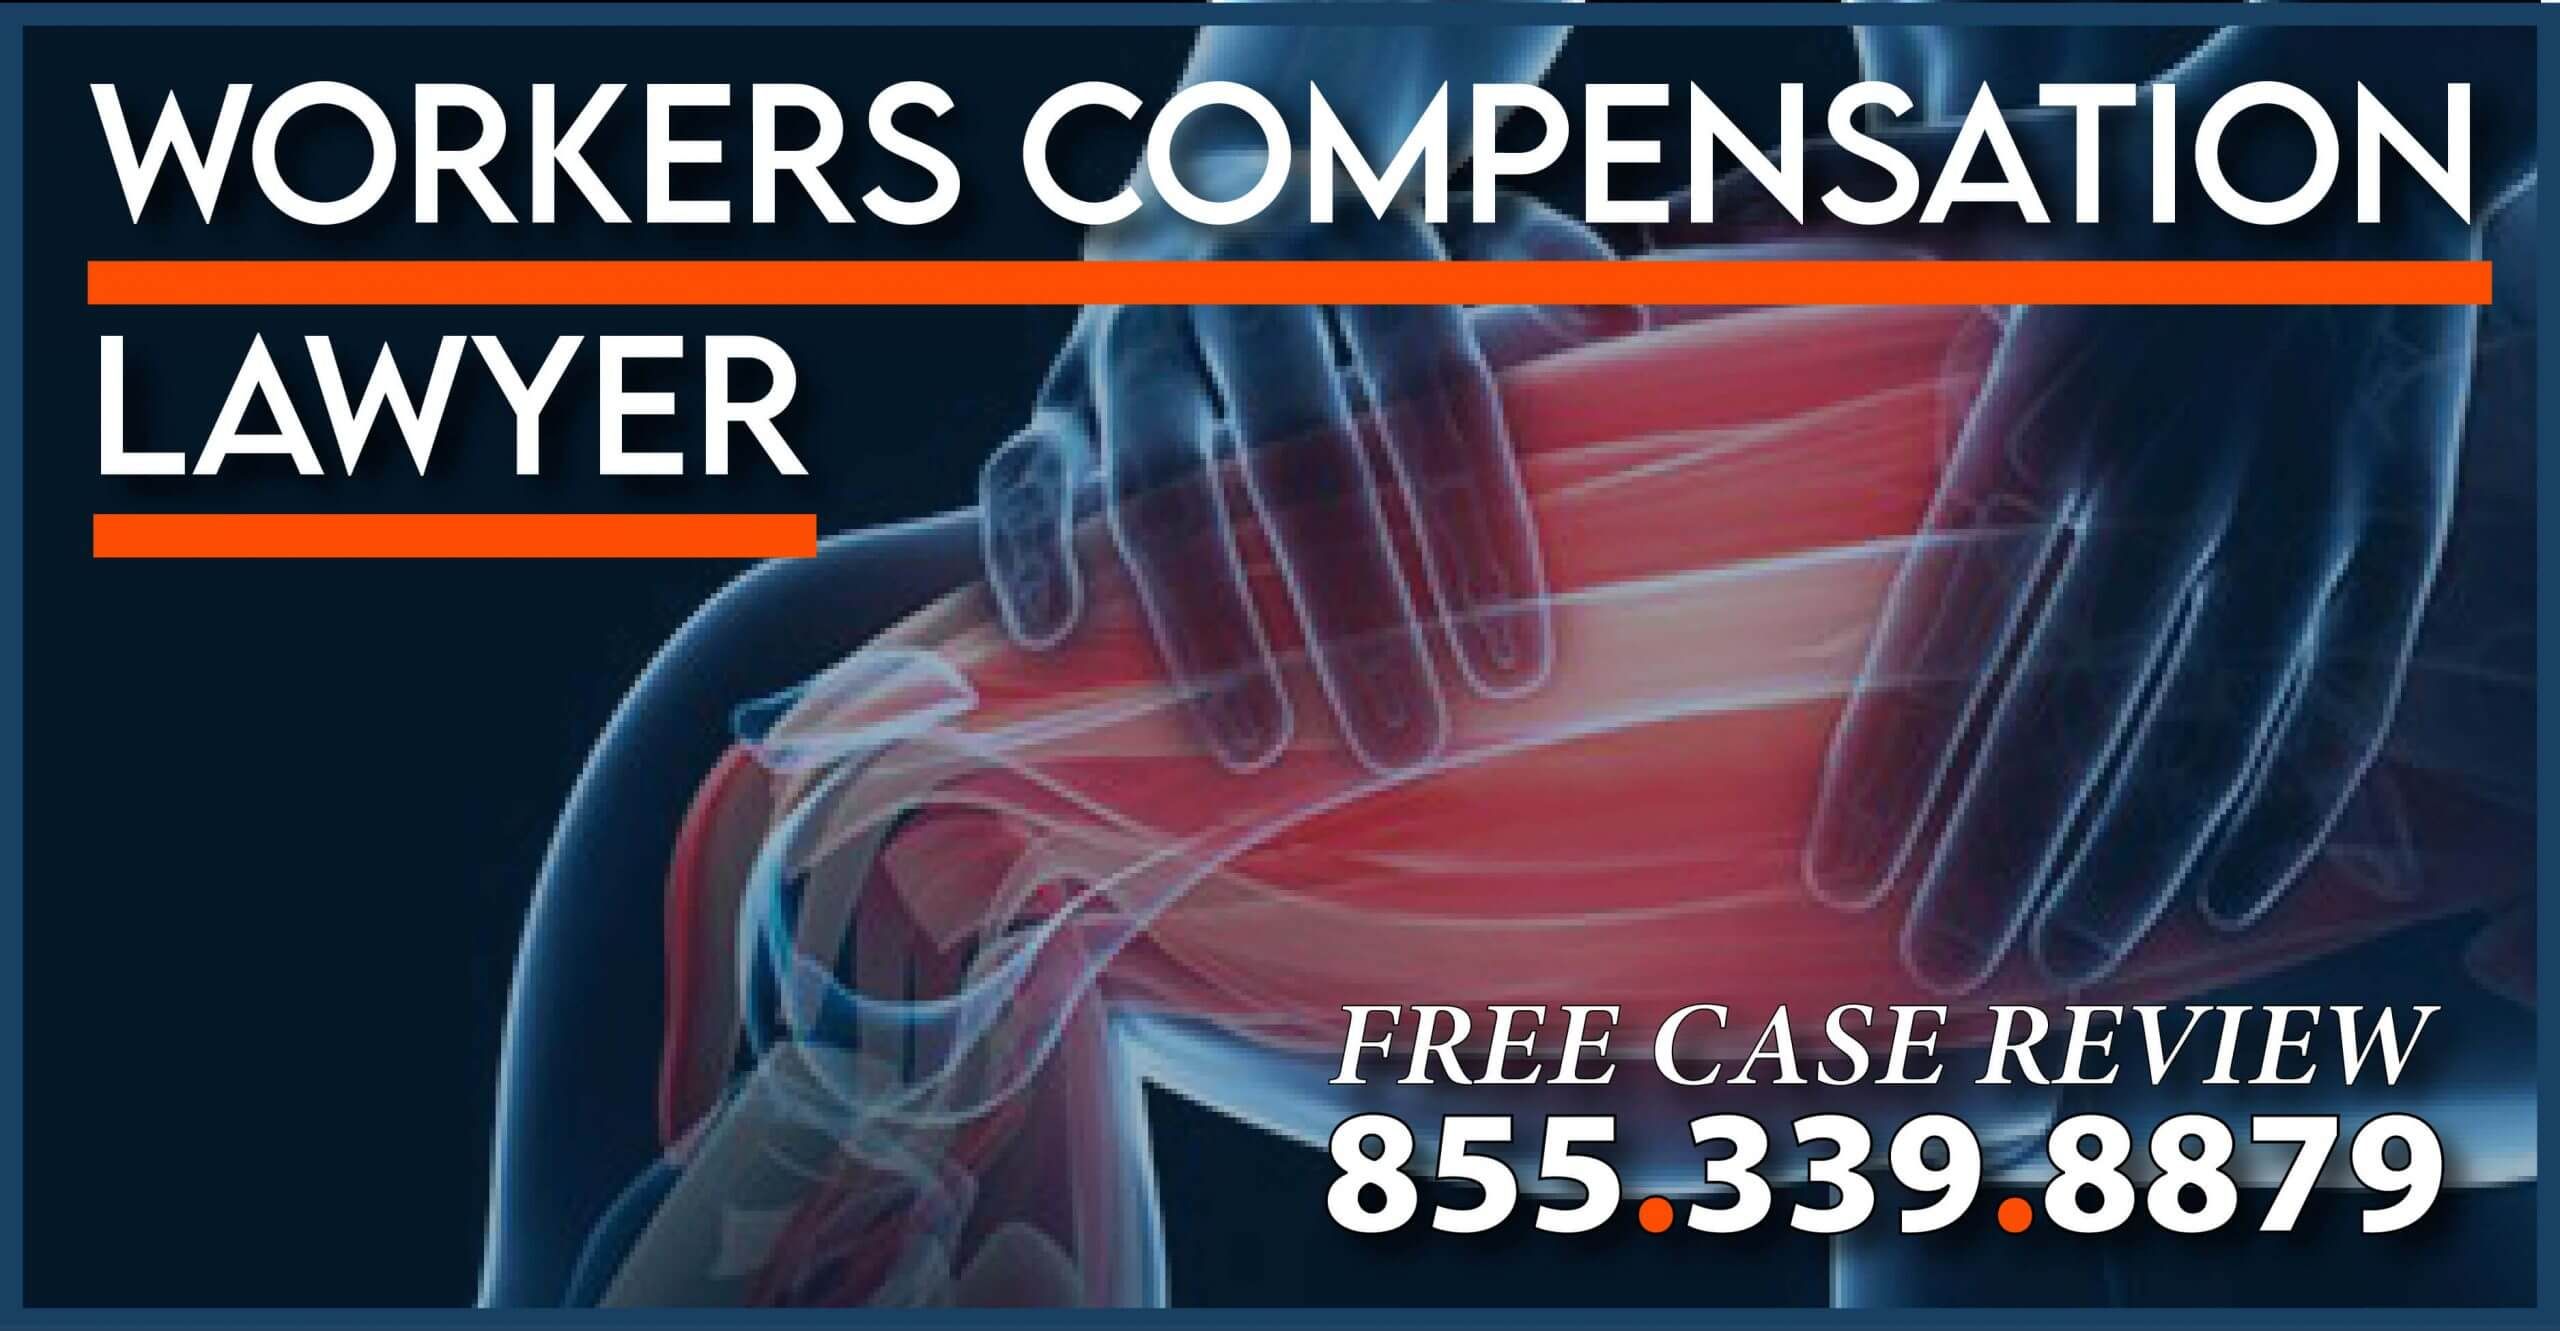 crps workers compensation lawyer sue injury attorney